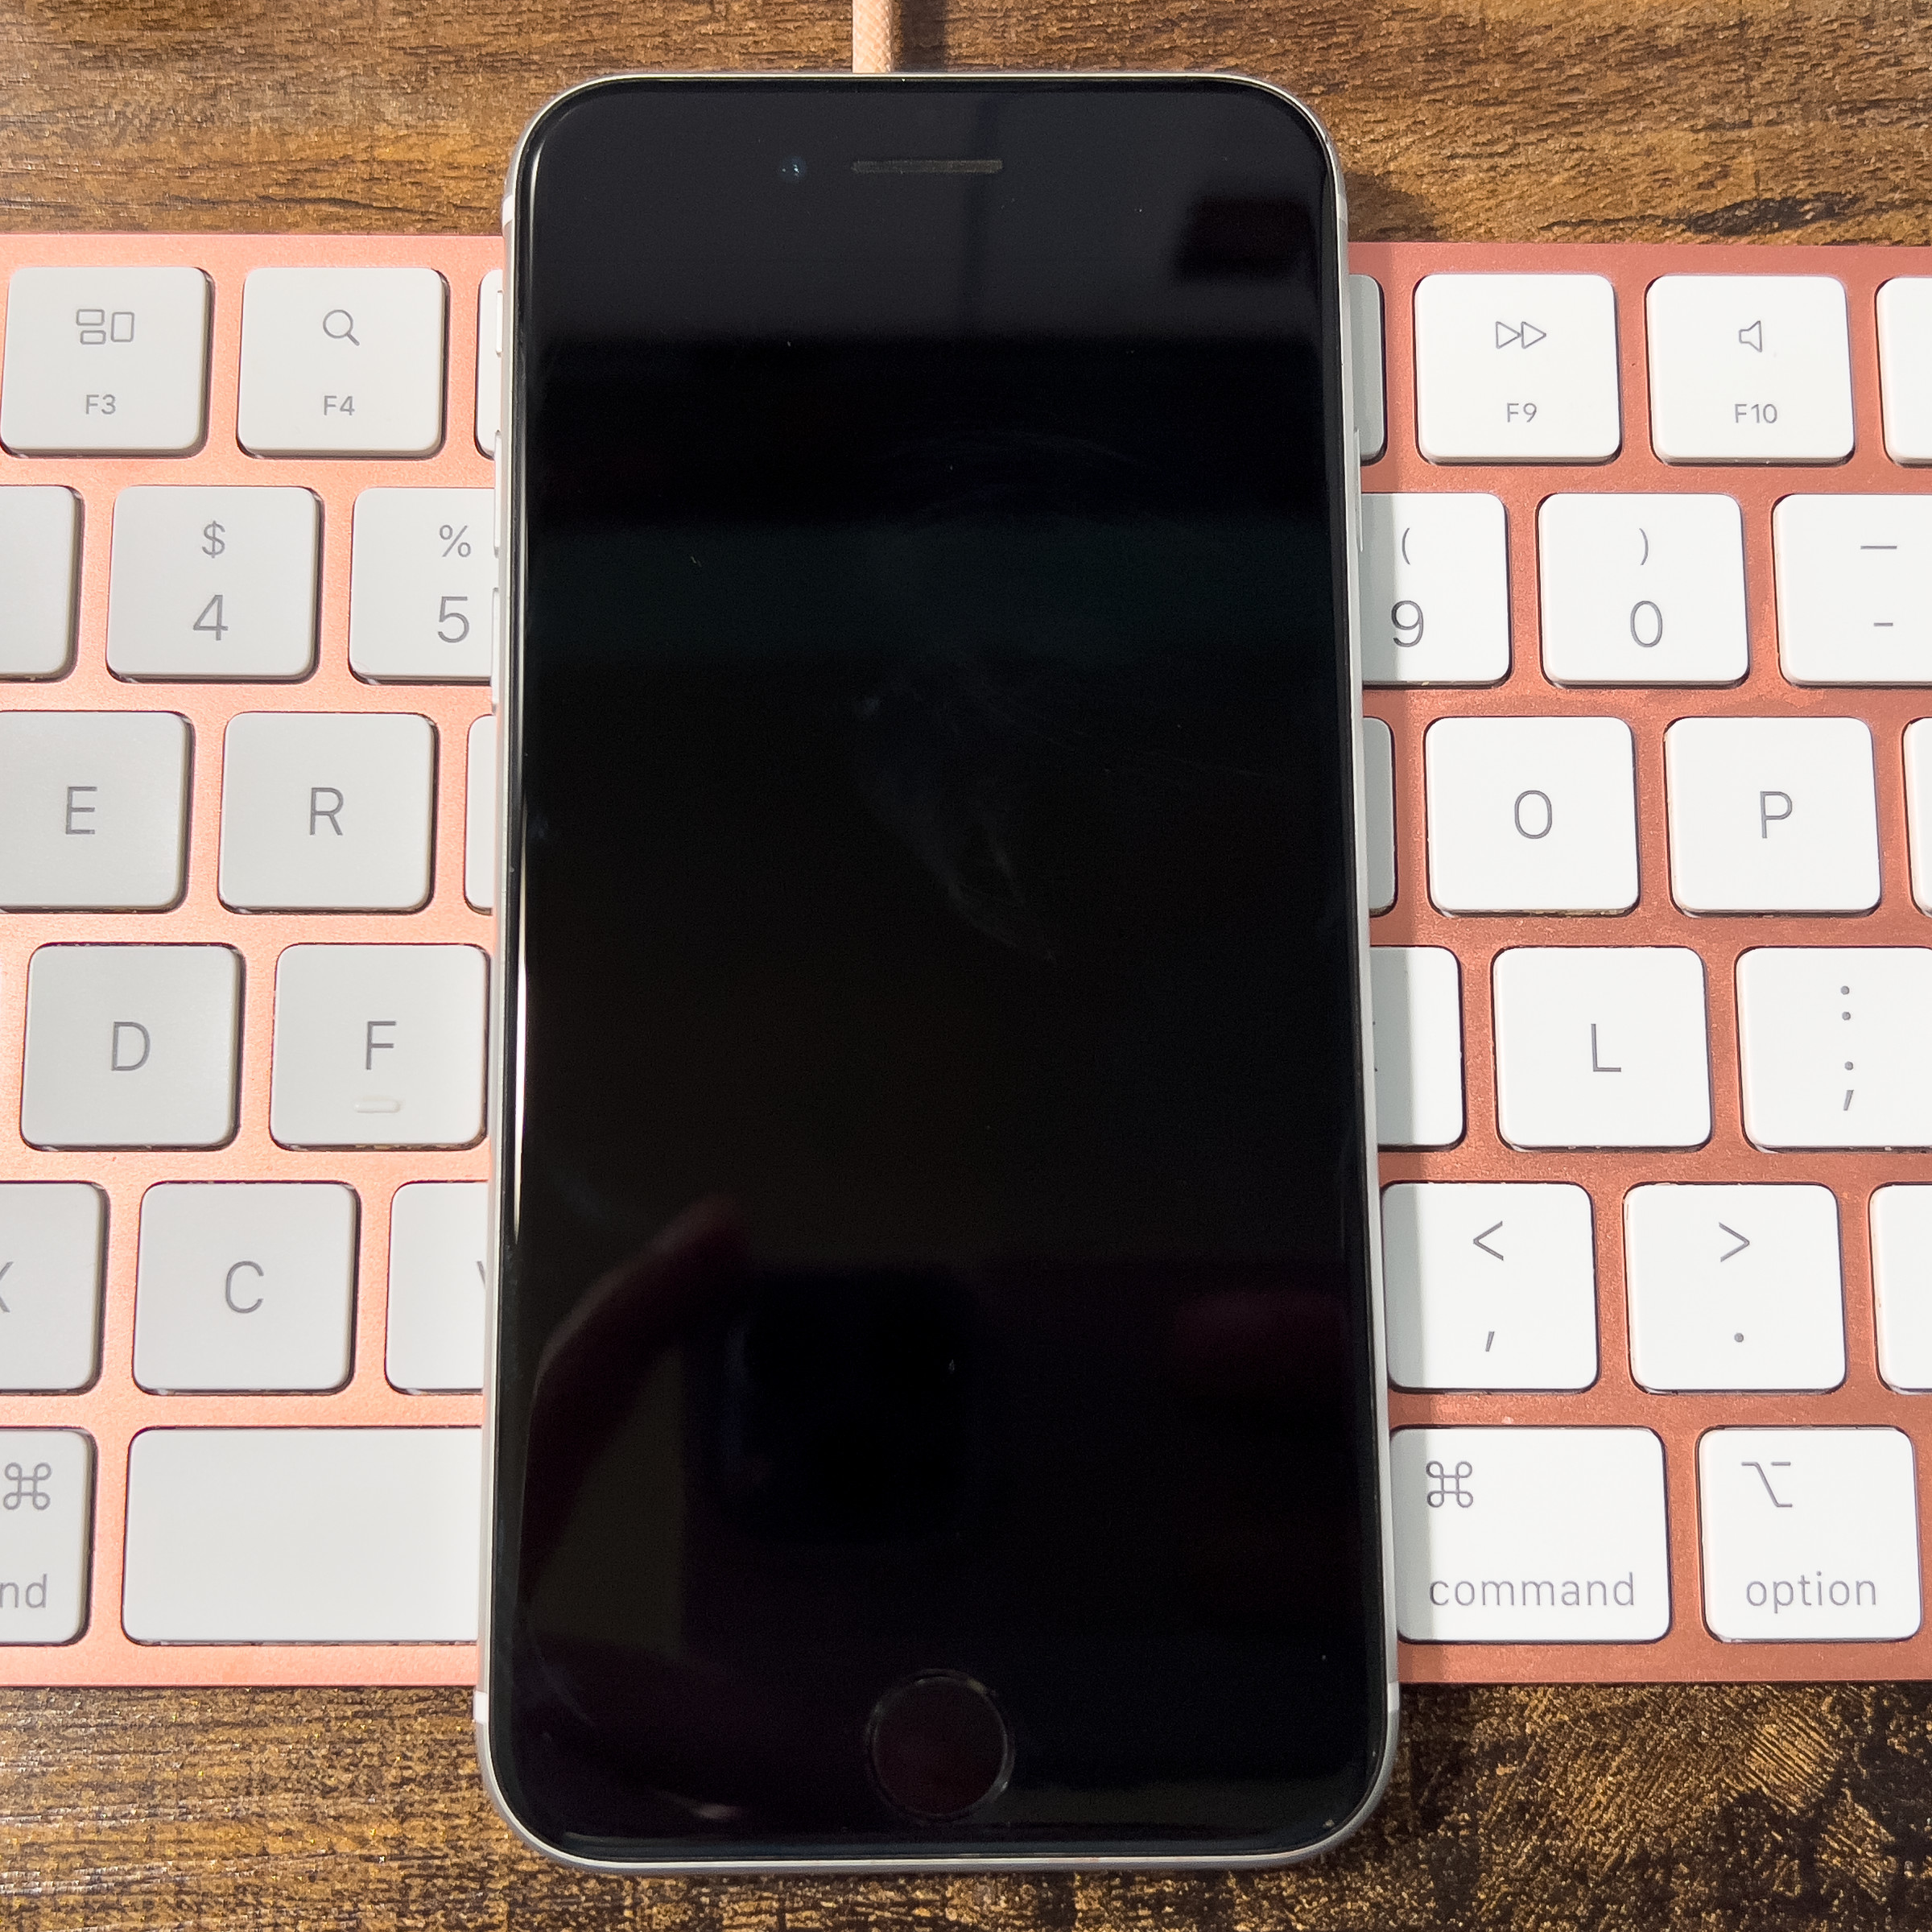 A picture of an iPhone SE laying on a Magic Keyboard.